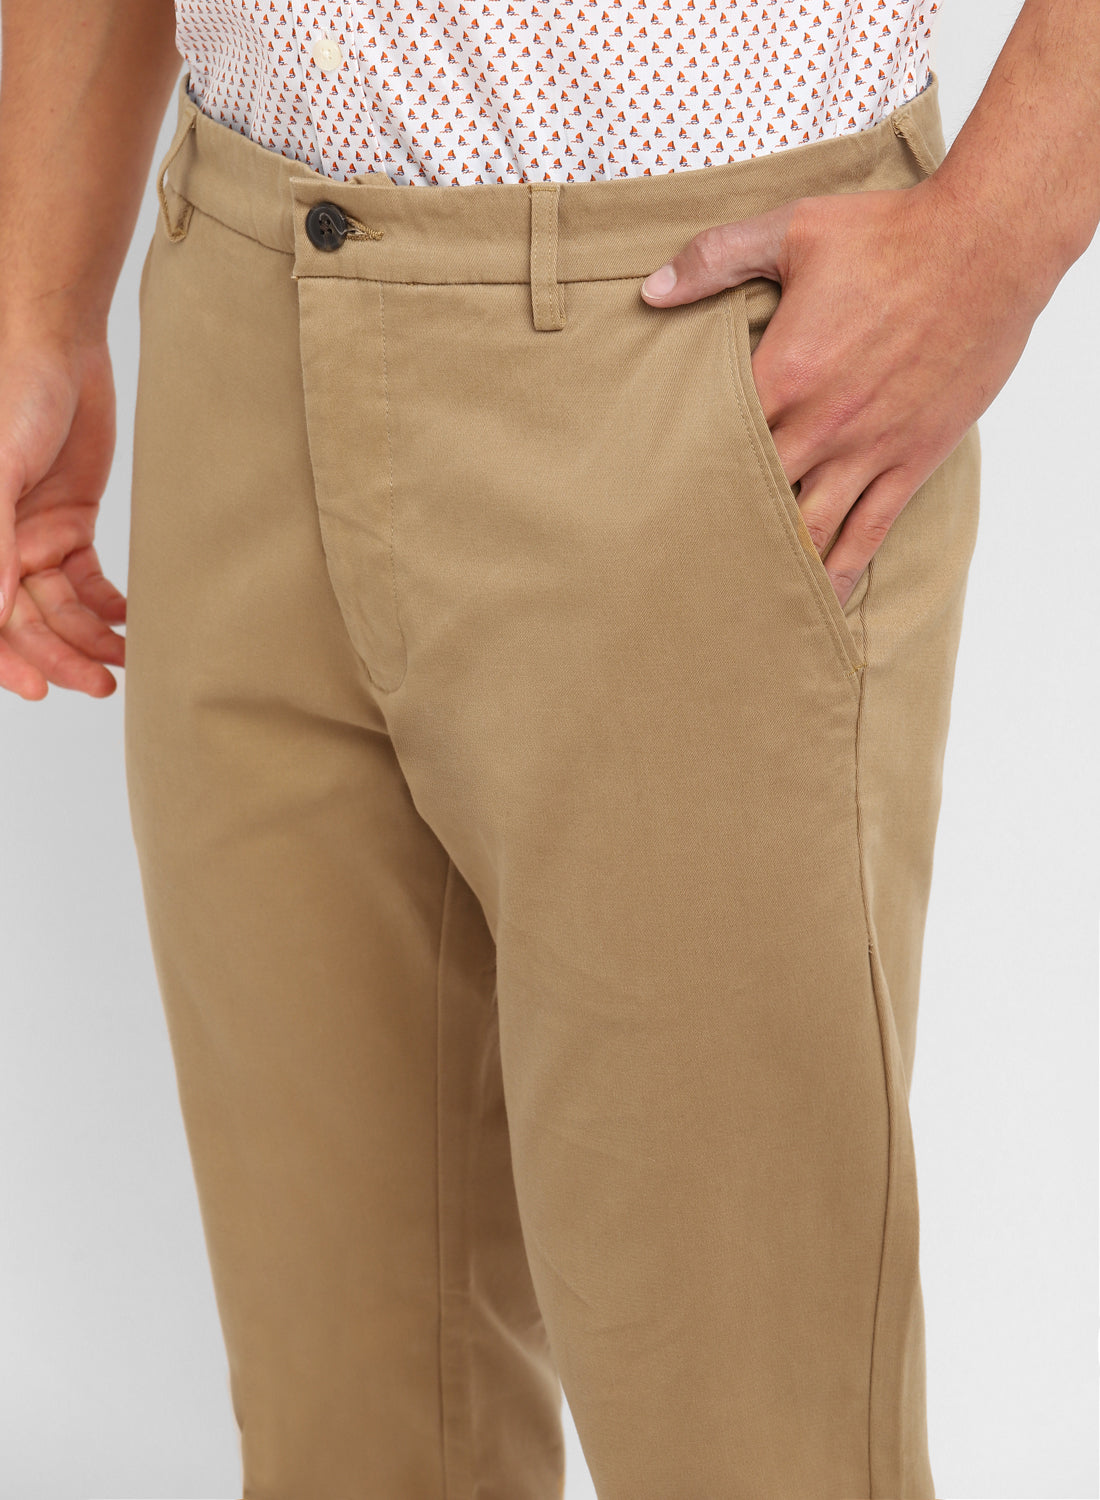 Best Trouser Retailers Givo in Mangalore - Justdial